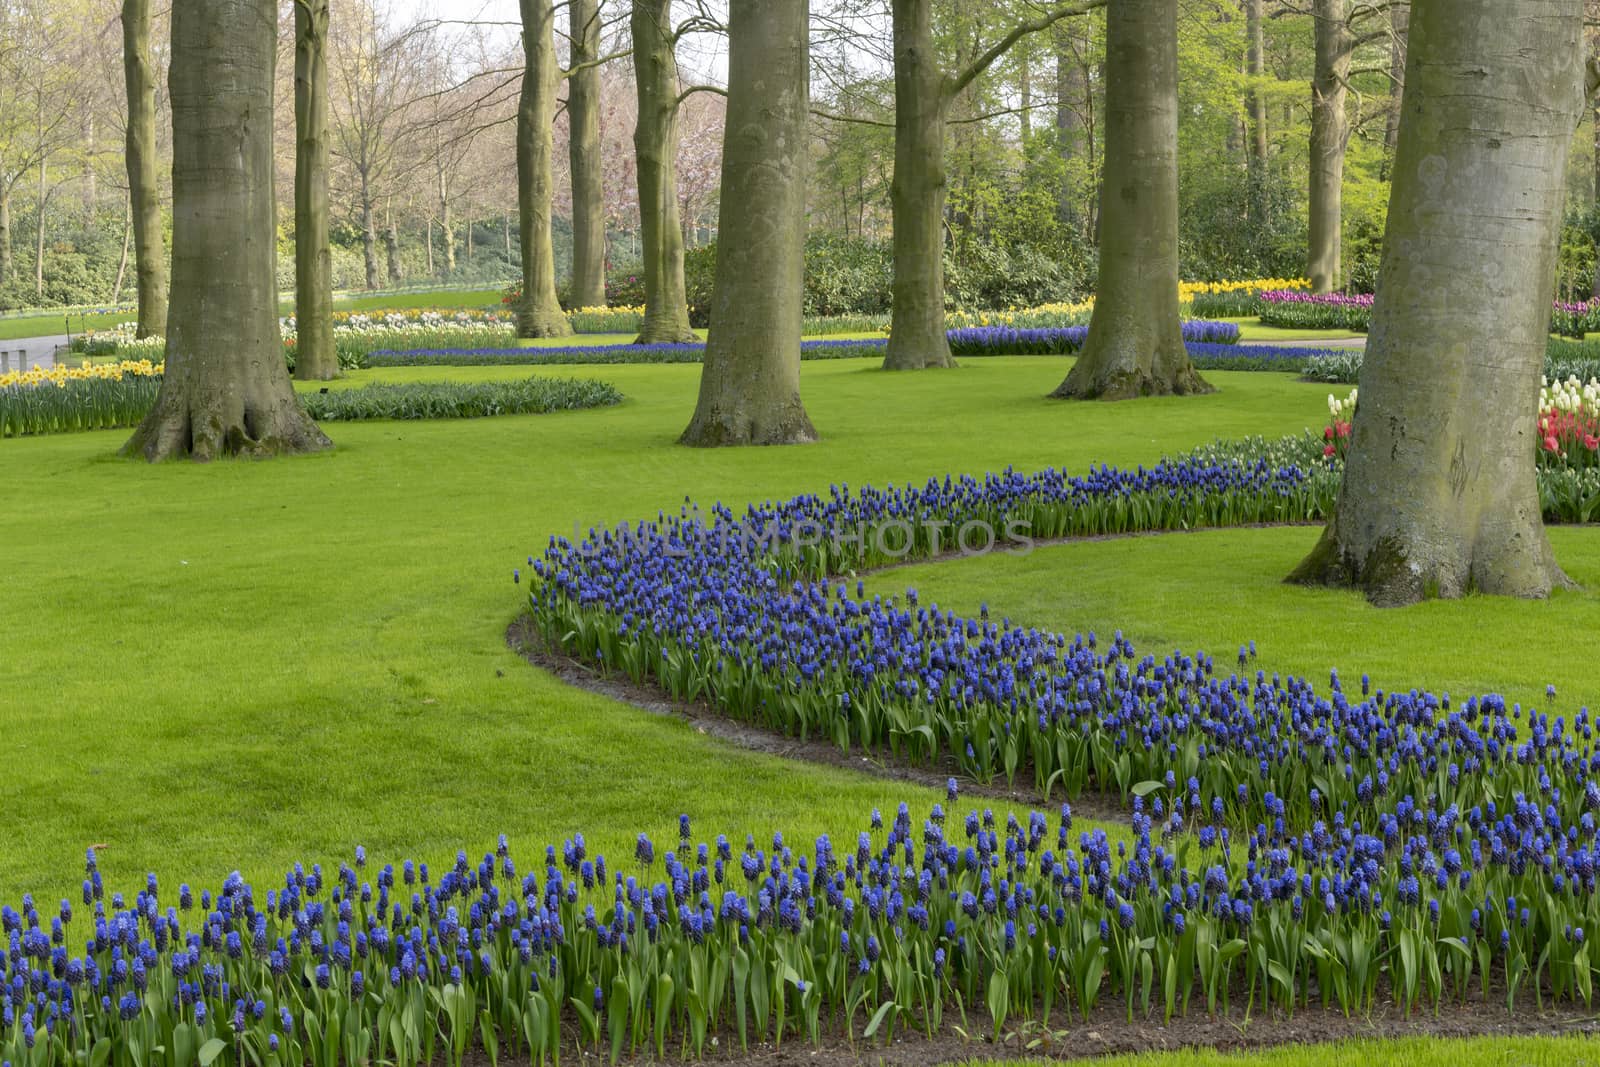 Blues flowers growing around trees and green grass in a well maintained spring garden in Netherlands